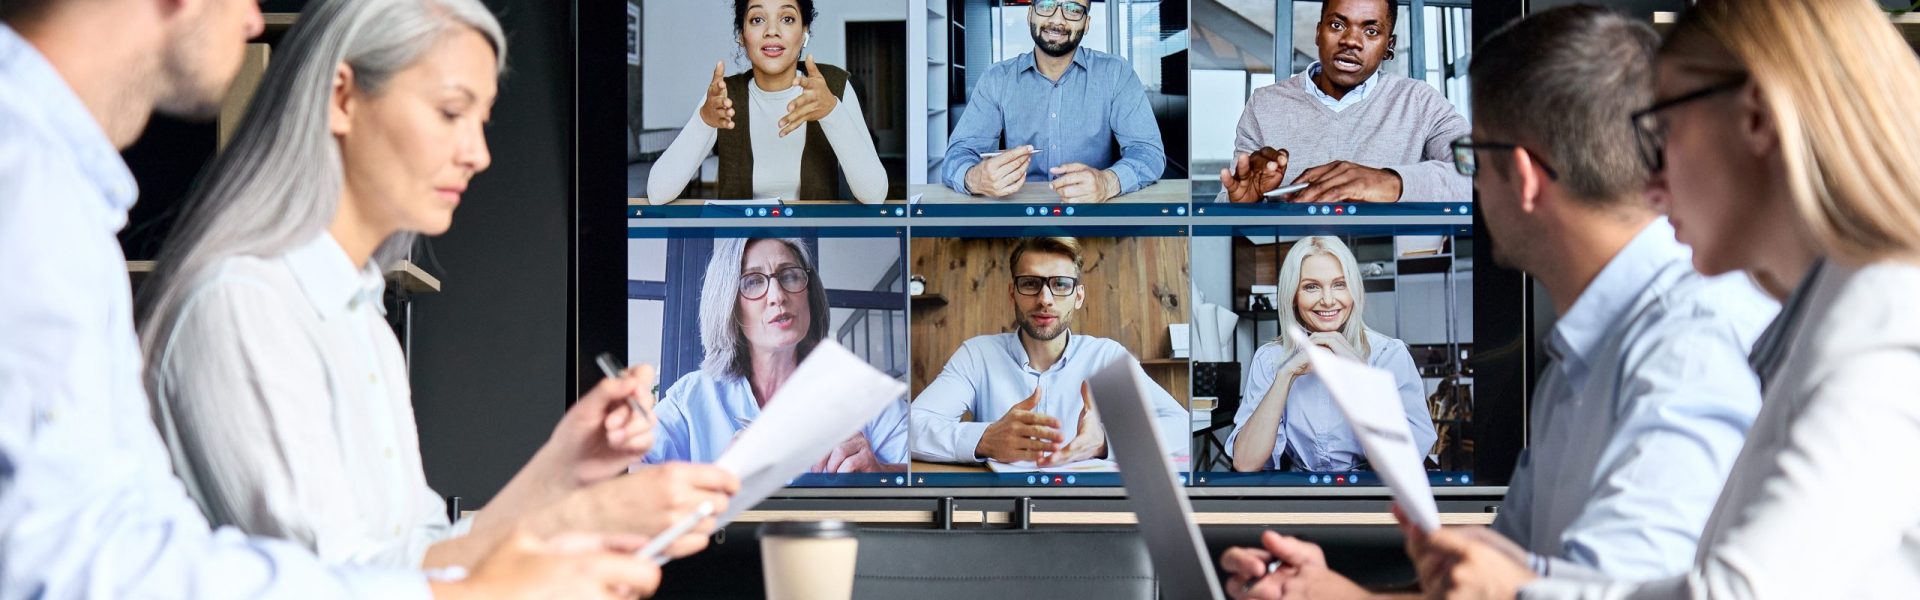 Global corporation online videoconference in meeting room with diverse people sitting in modern office and multicultural multiethnic colleagues on big screen monitor. Business technologies concept.